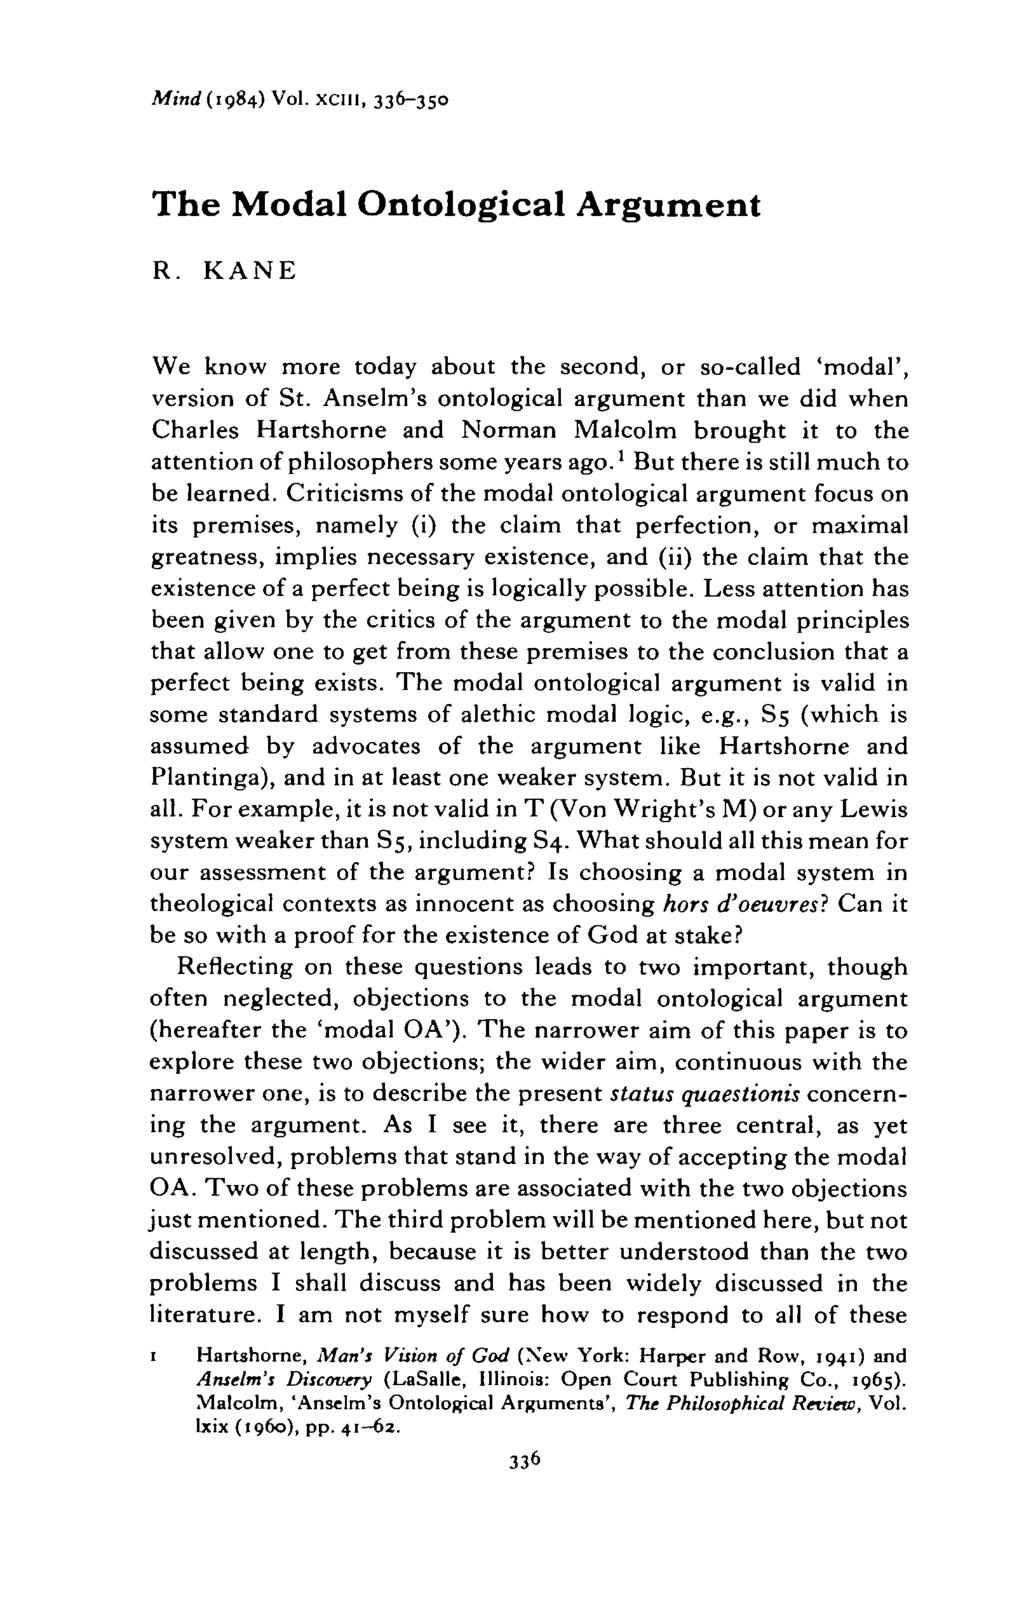 Mind (1984) Vol. XCIII, 336-350 The Modal Ontological Argument R. KANE We know more today about the second, or so-called 'modal', version of St.